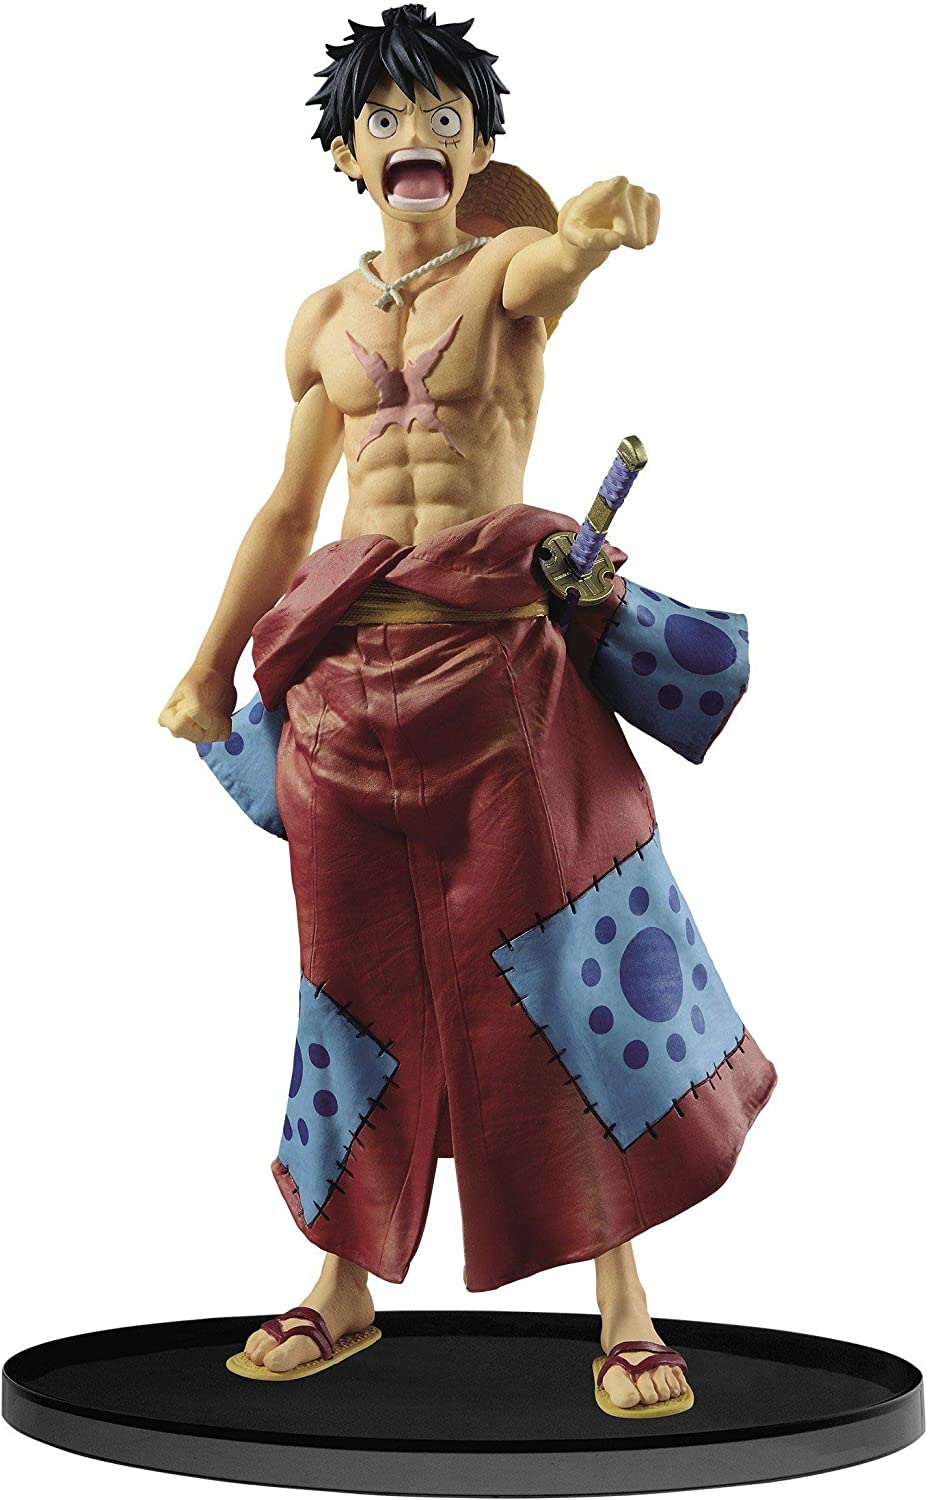 Legendary Treasures: Discover a Vast Collection of One Piece Statues